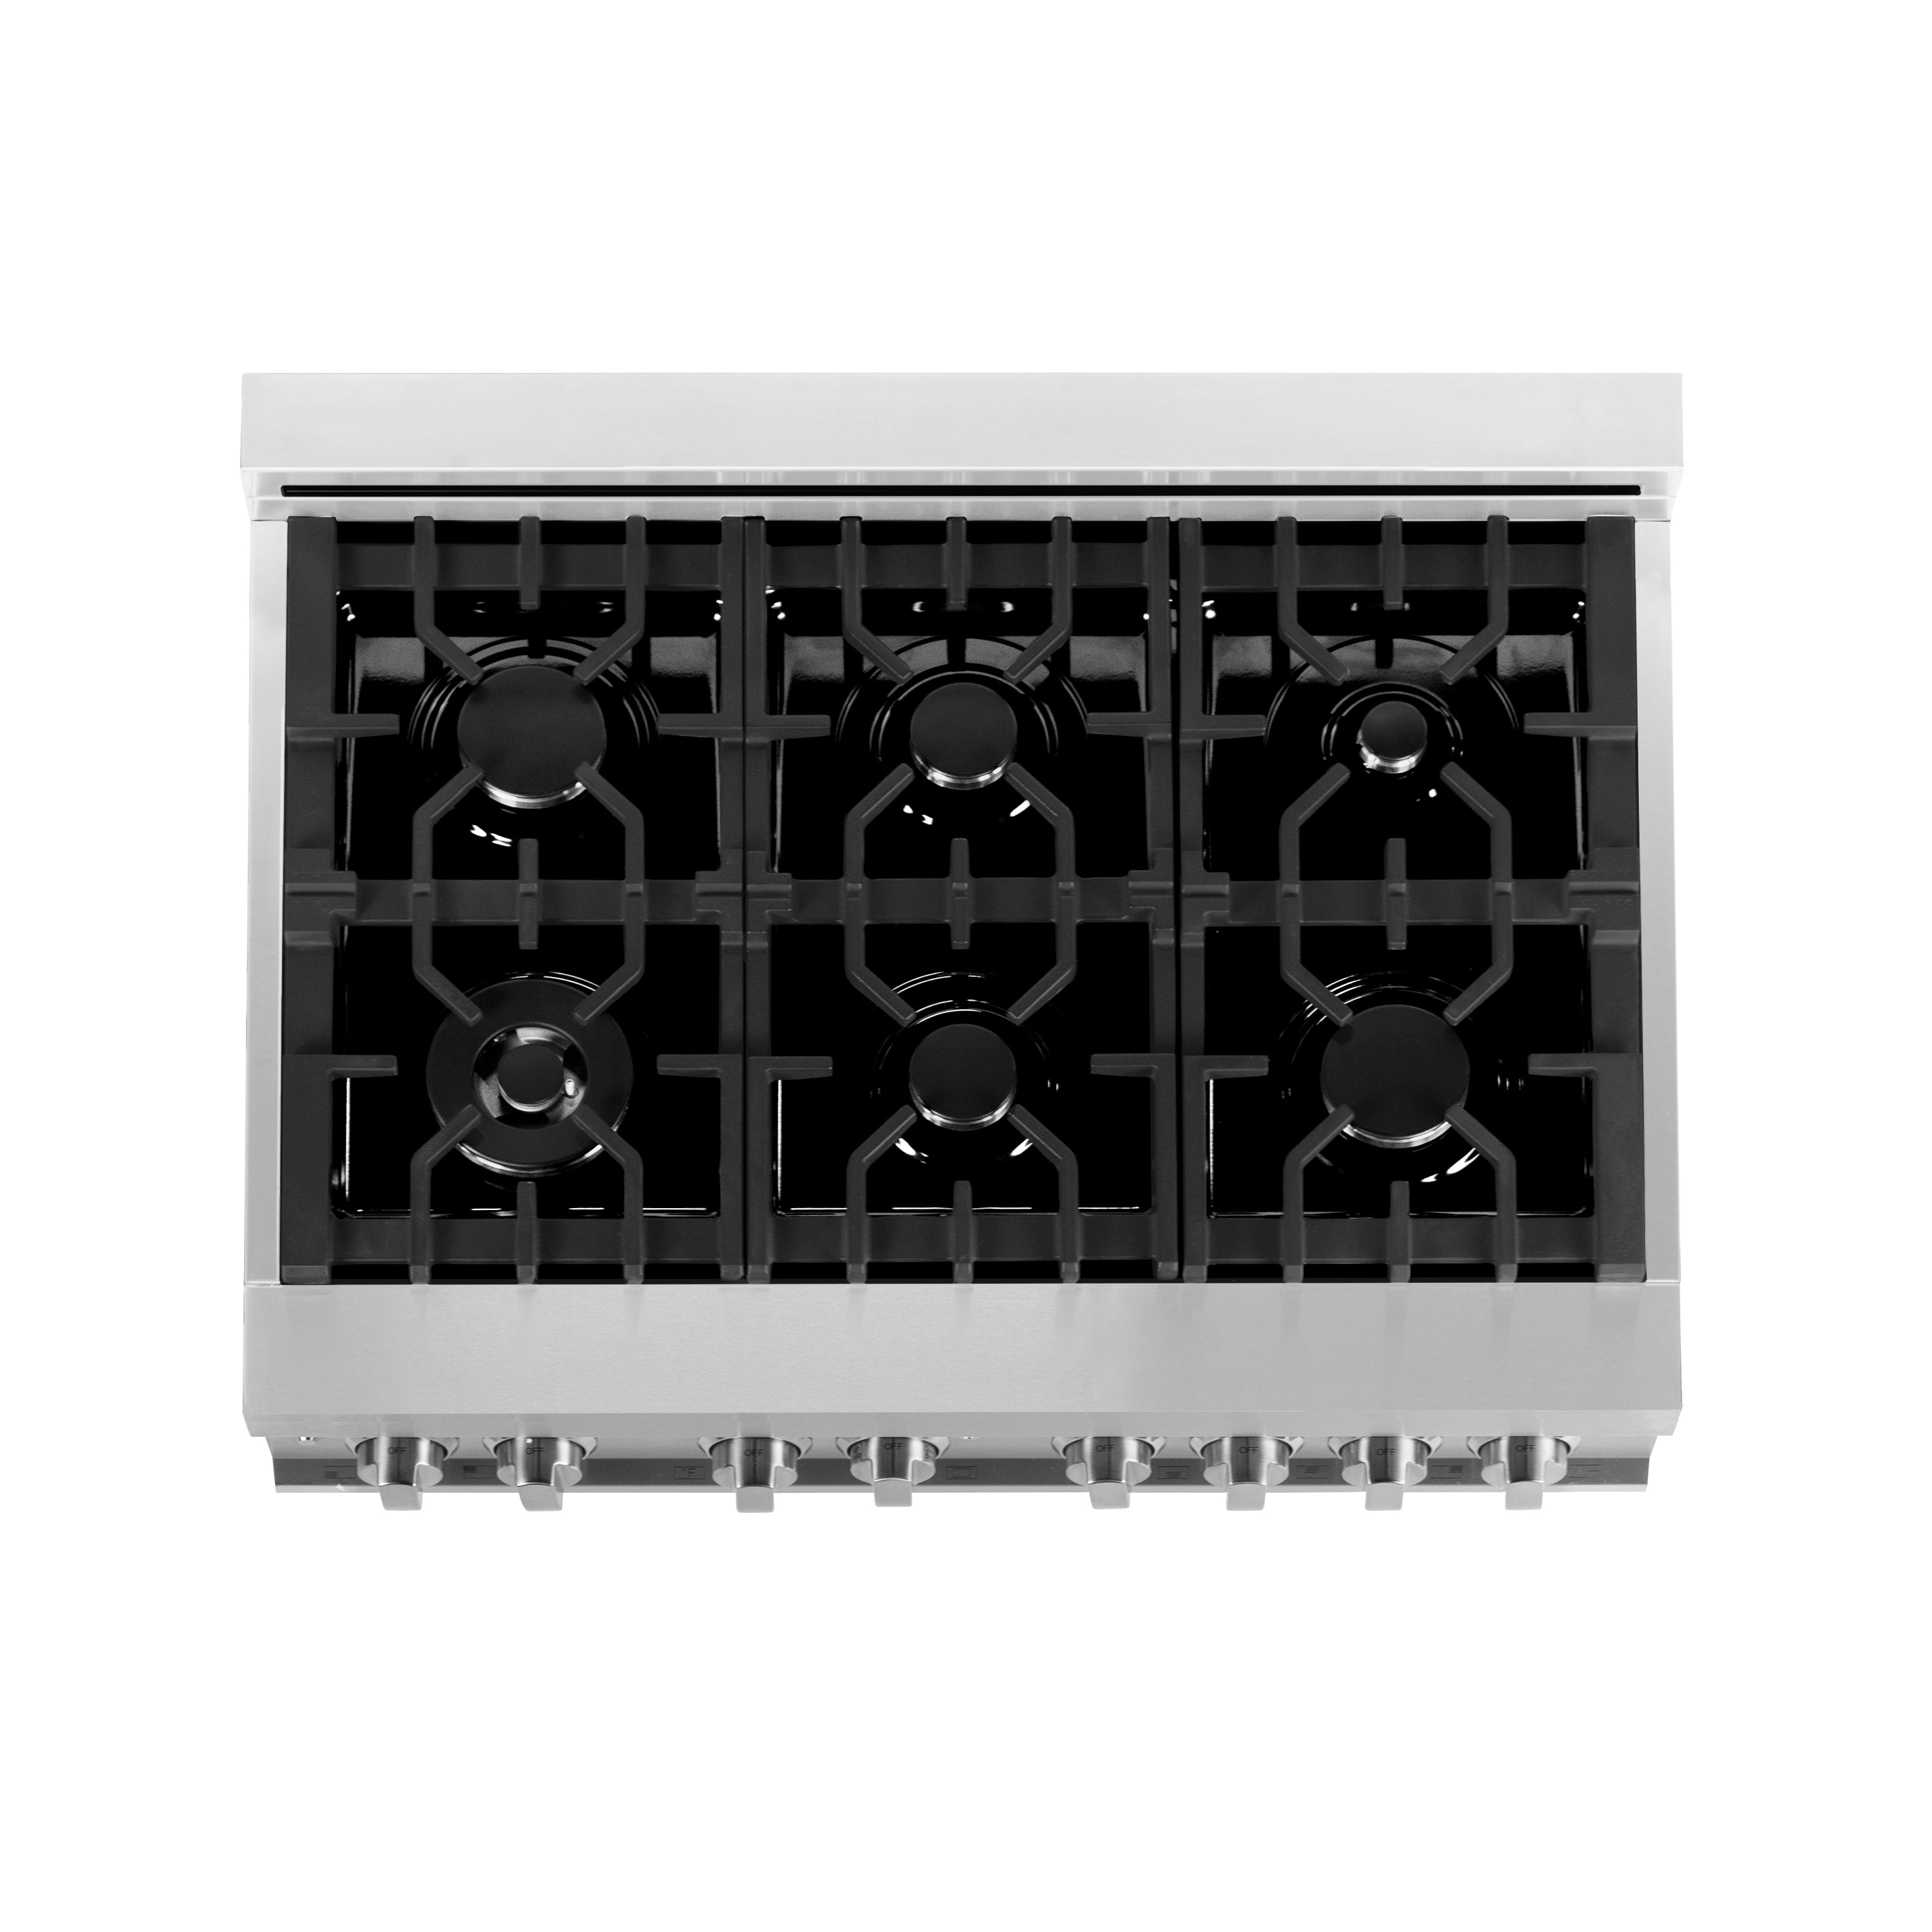 ZLINE 36" 4.6 cu. ft. Electric Oven and Gas Cooktop Dual Fuel Range with Griddle in Stainless Steel (RA-GR-36)